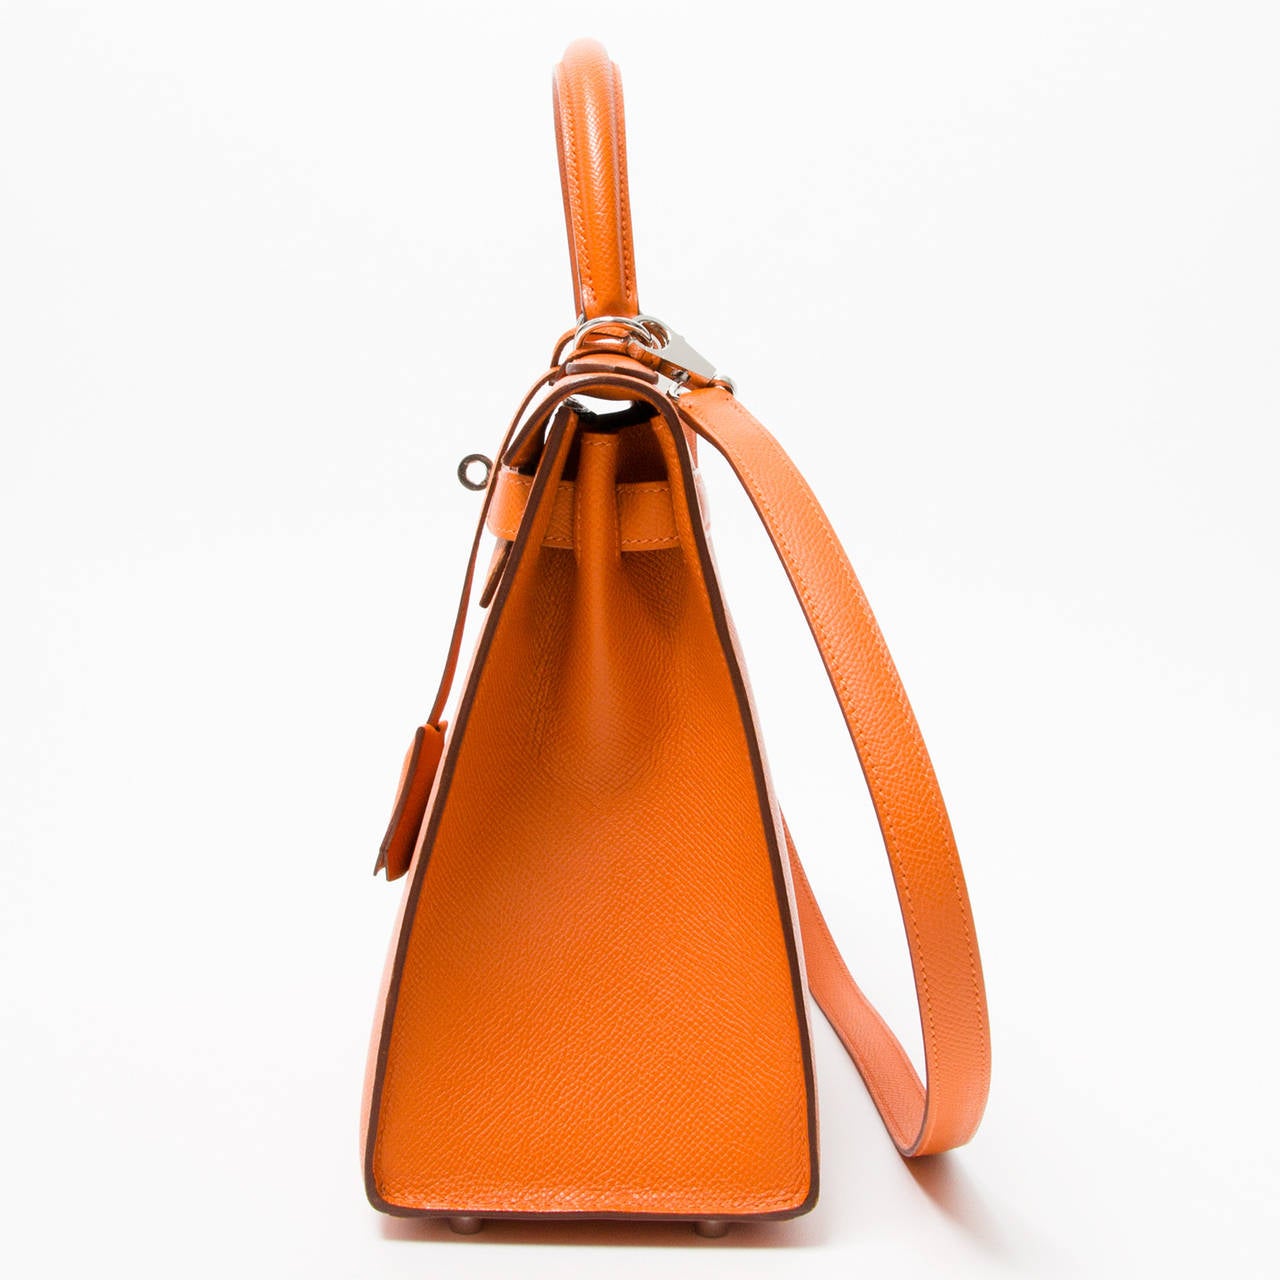 Hermes Orange Kelly 28 in Epsom leather and PHW. 
The compressed type of leather holds true to its shape in all instances and is completely resilient to scratches. With the ‘laminated’ exterior, cleaning an Epsom leather bag is as simple as wiping